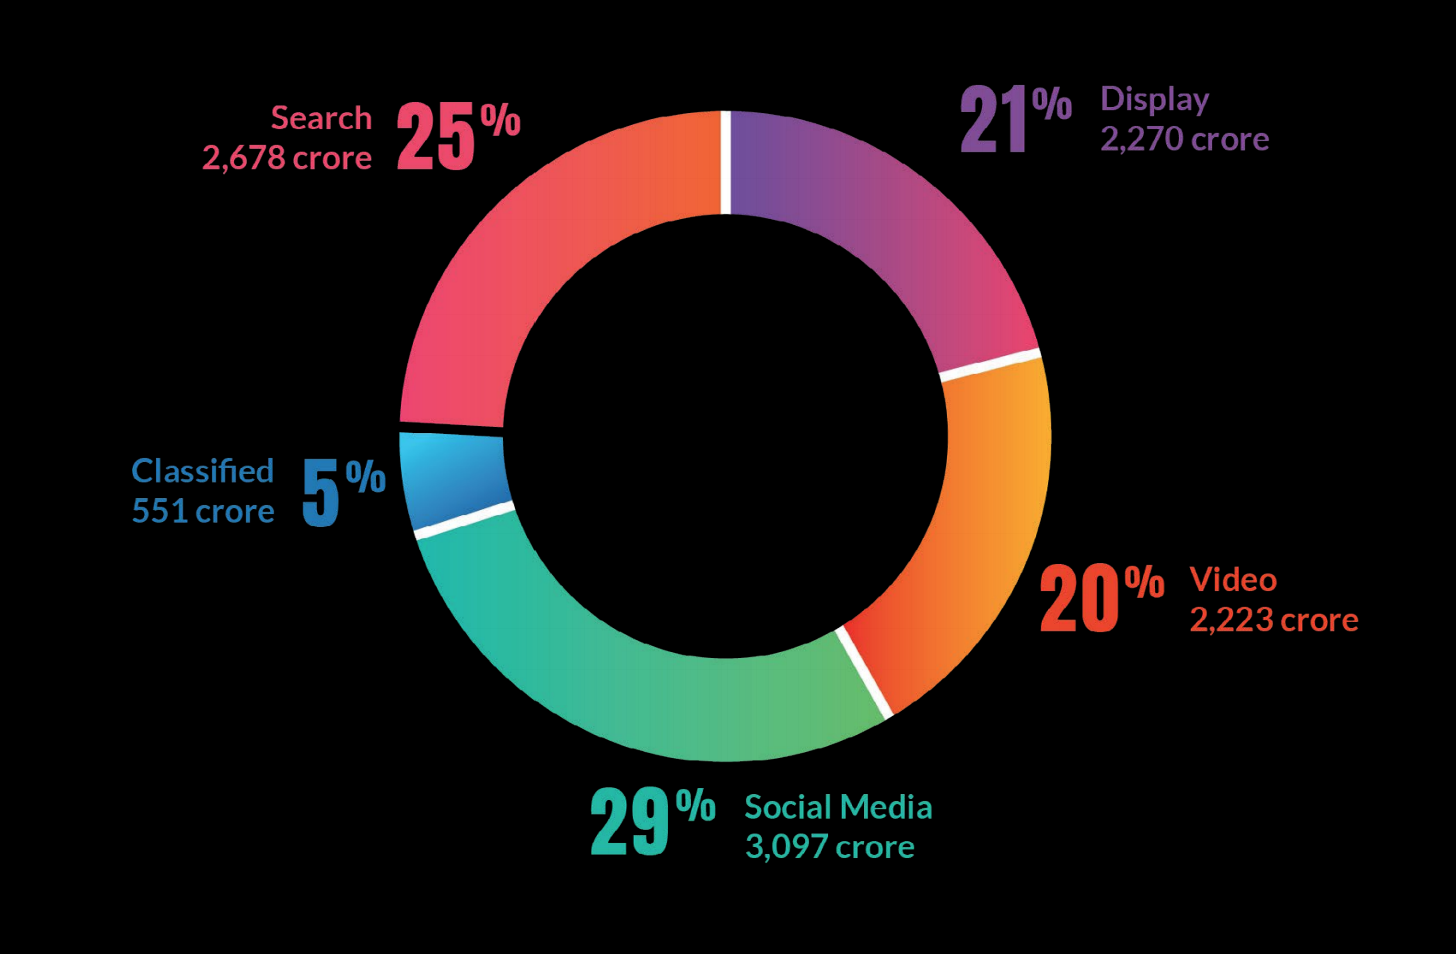 Display Ad Spends in India